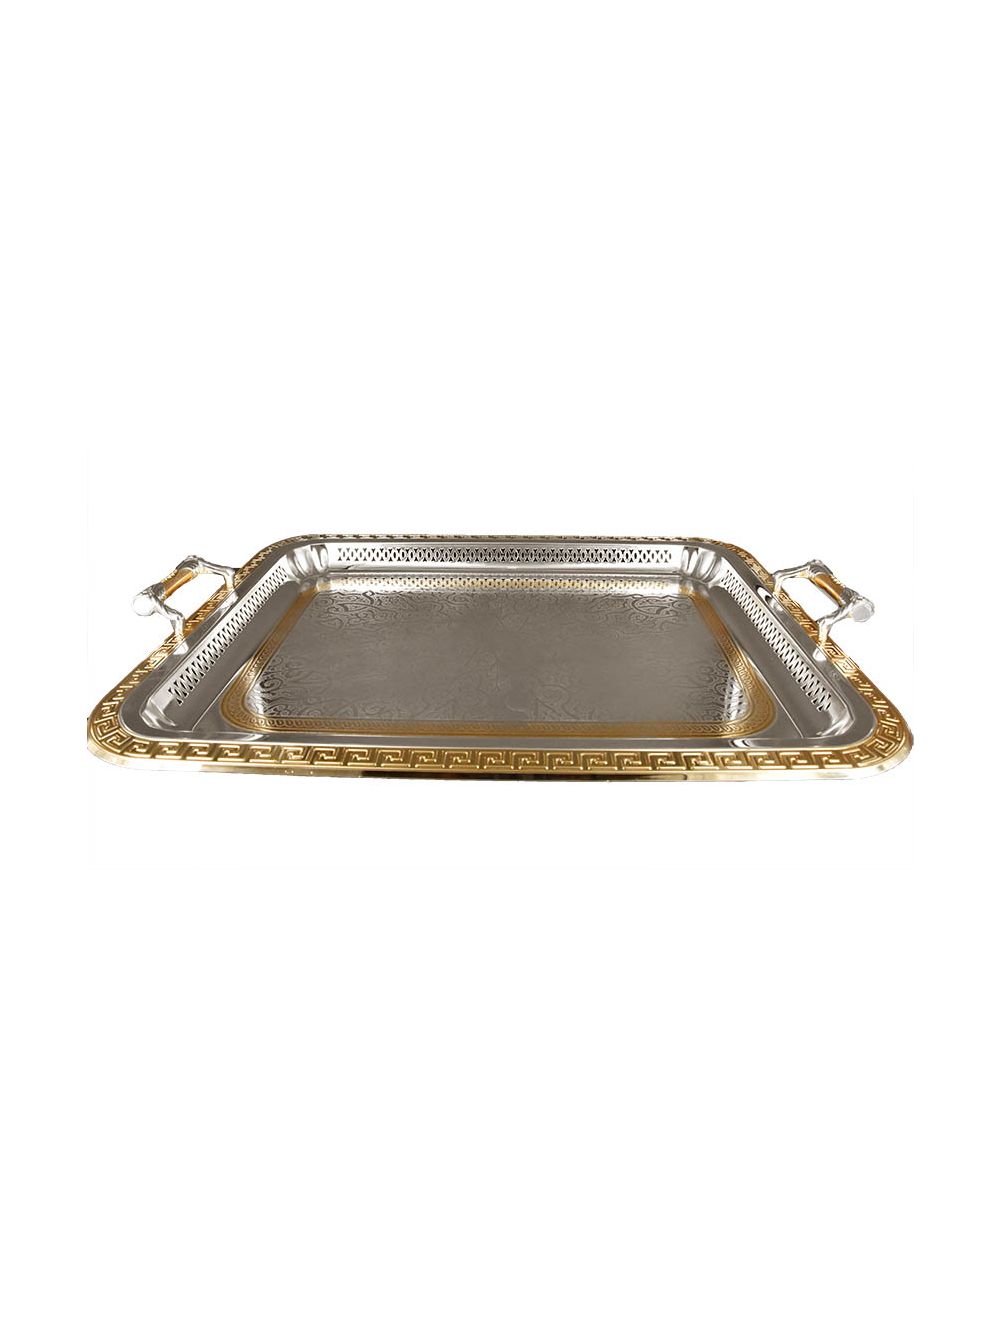 Serving Tray Acrylic Silver and Gold